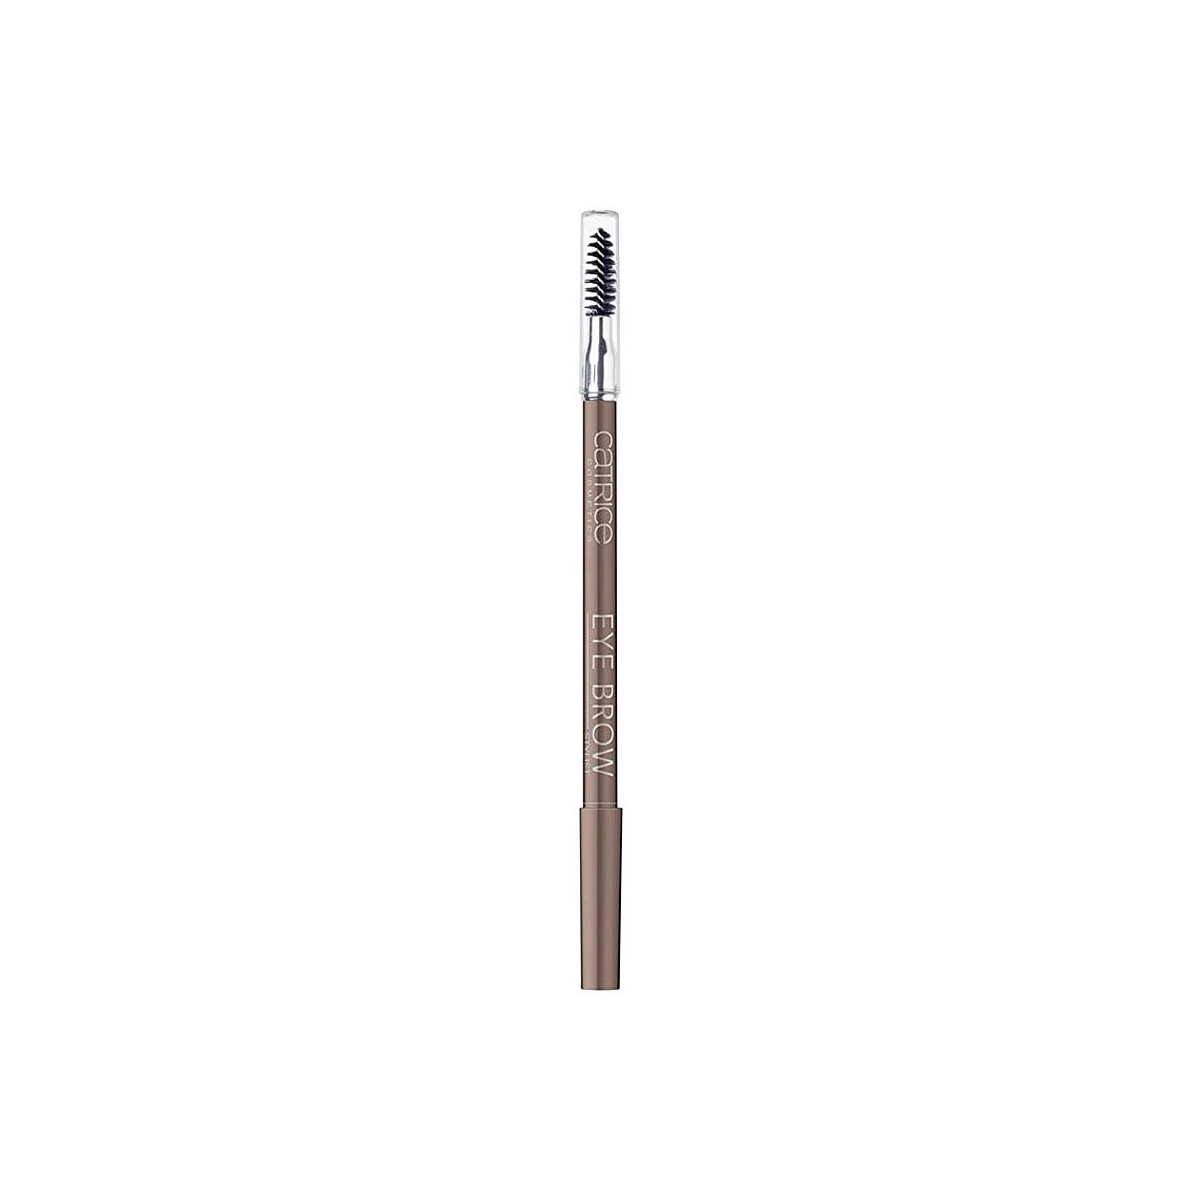 Beauté Femme Maquillage Sourcils Catrice Eye Brow Stylist 040-don't Let Me Brow'n 